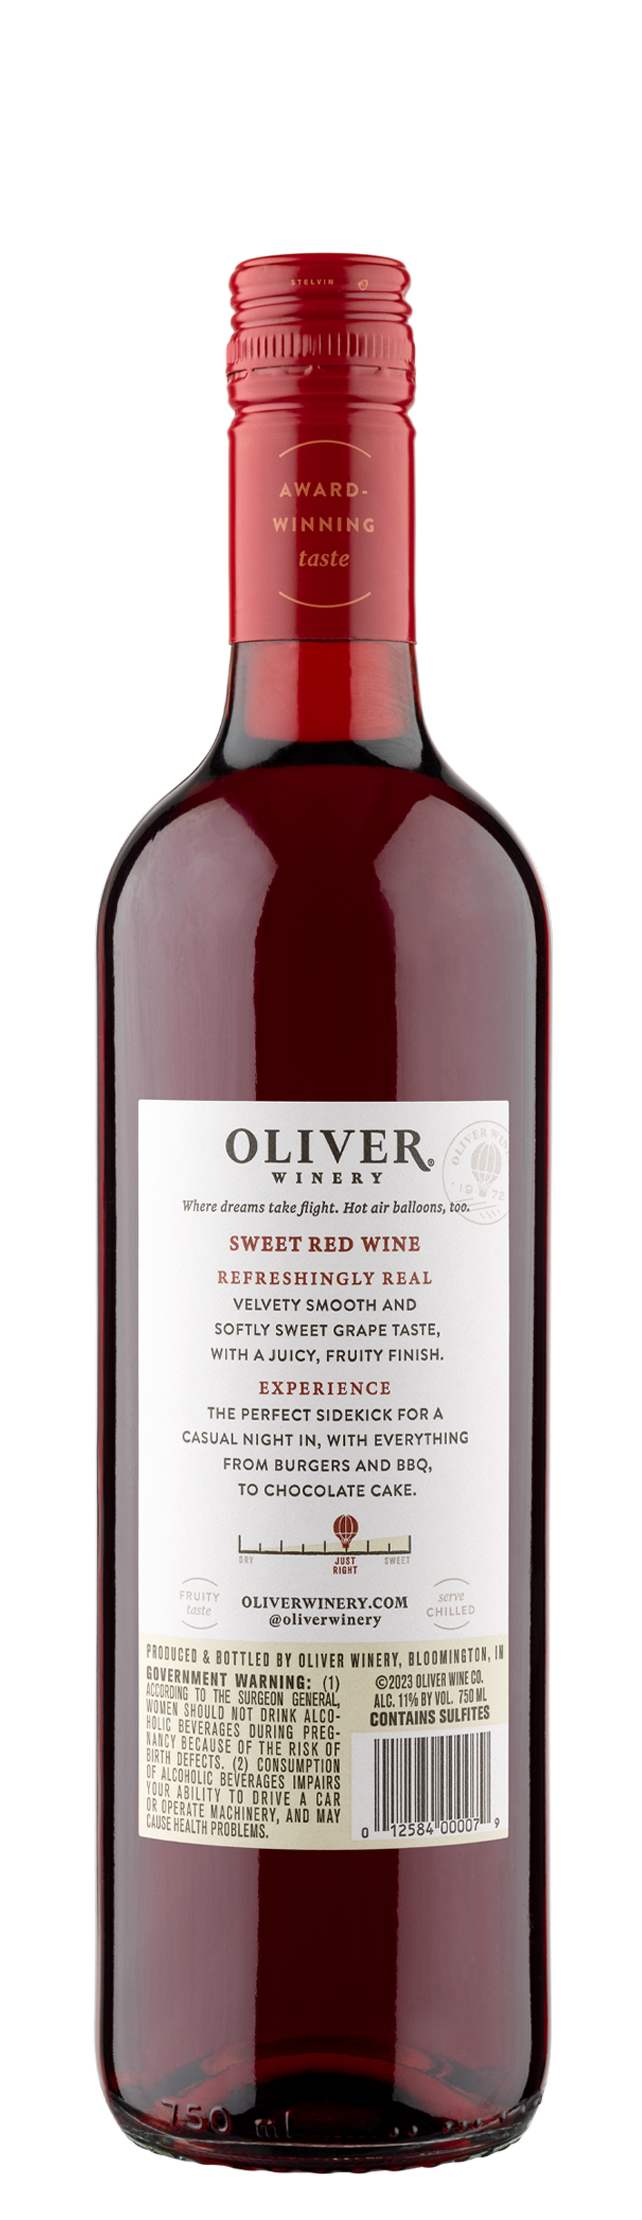 Oliver Sweet Red - Soft Collection Wine